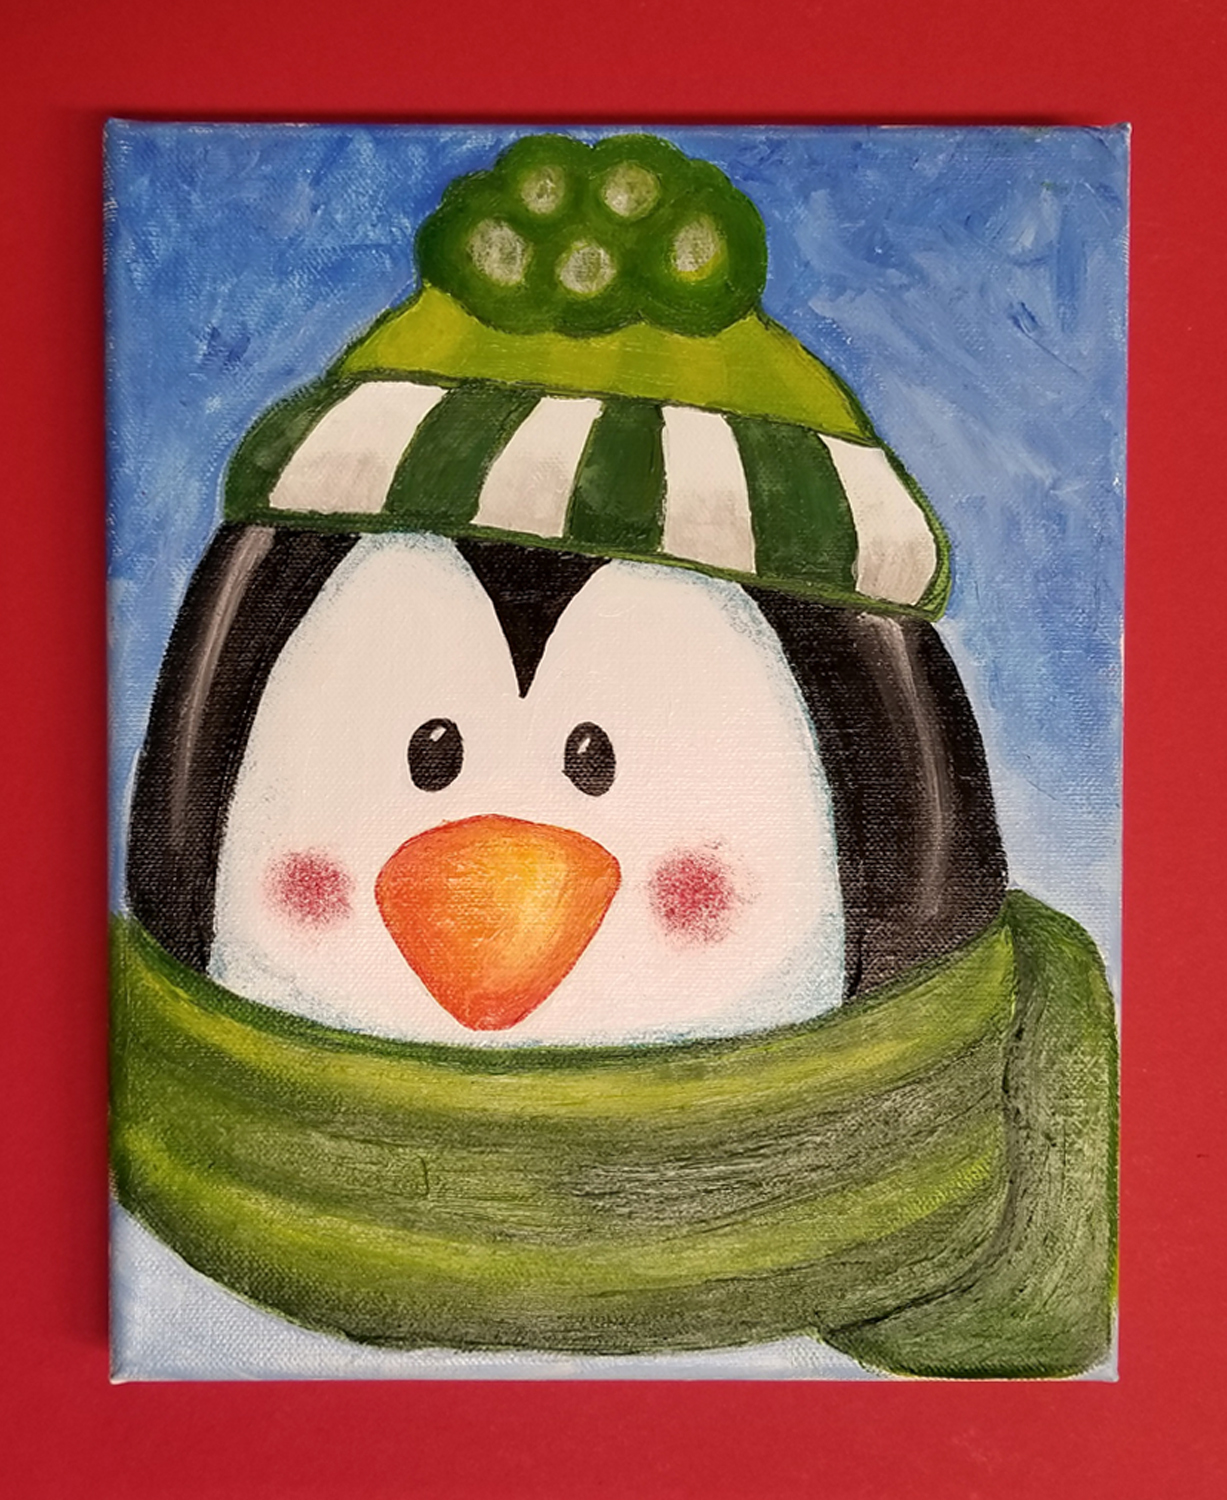 WINTER CANVAS PAINTING FOR KIDS